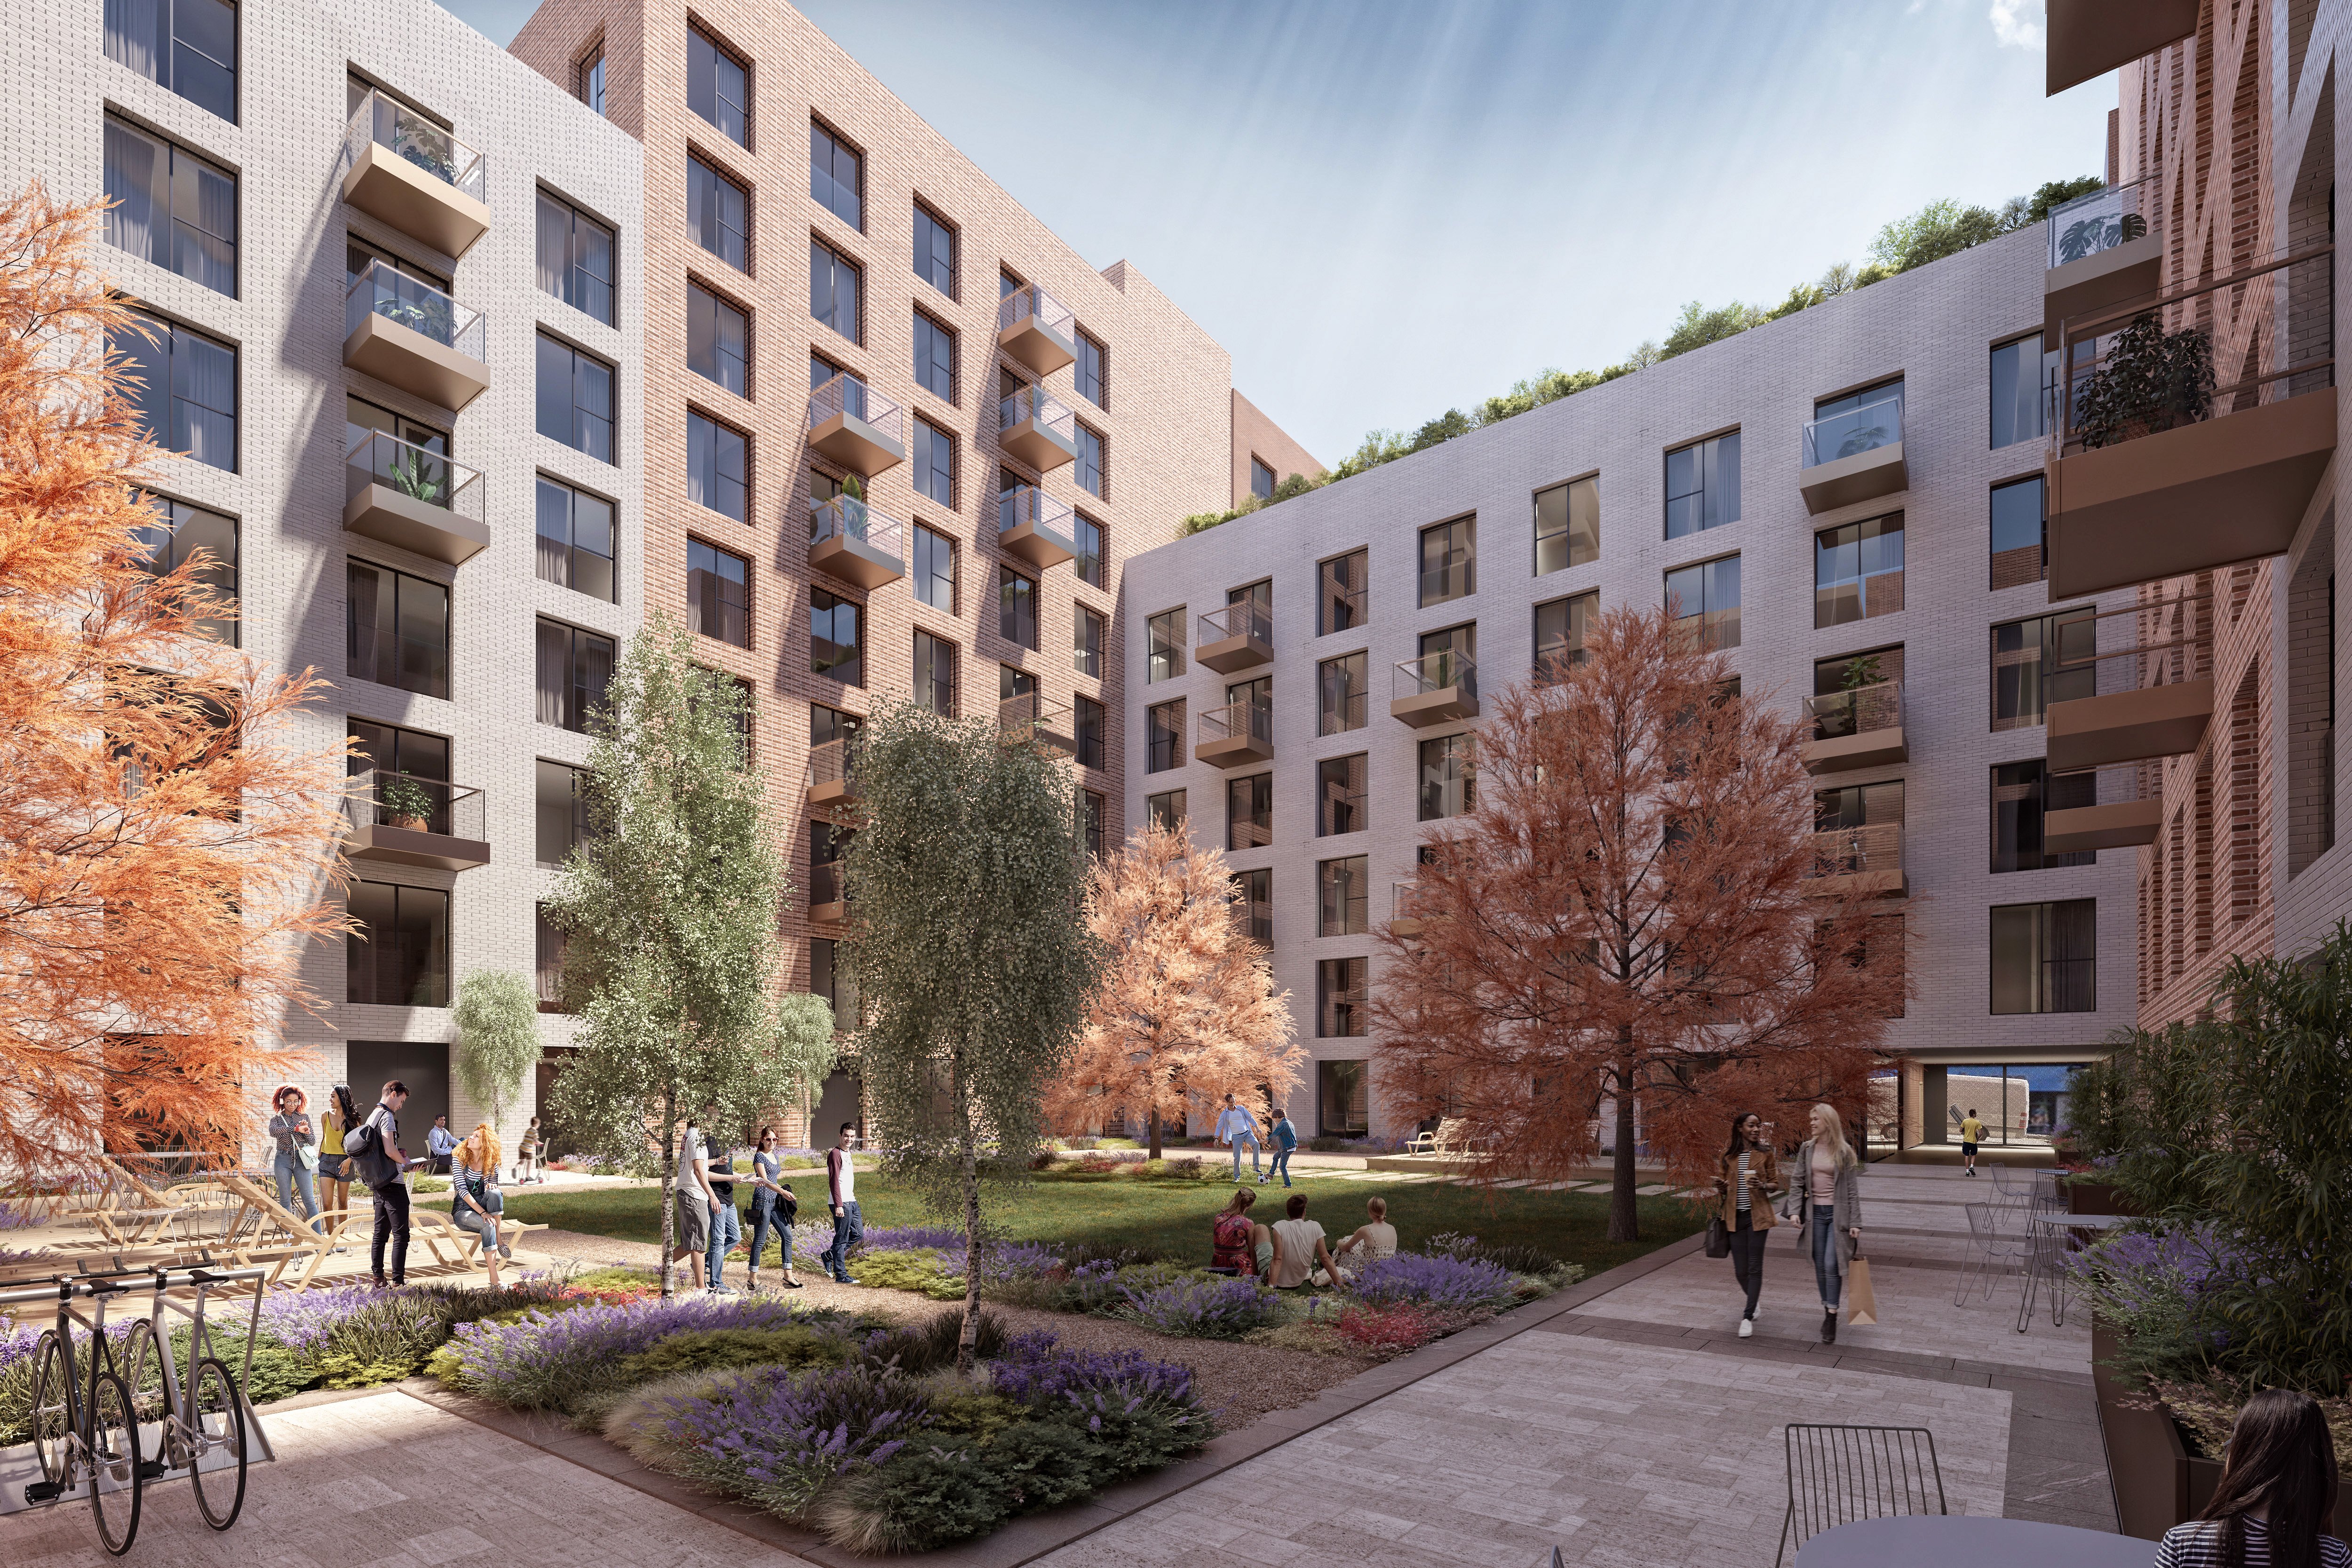 Cordia to build 366 more rental apartments in the U.K.